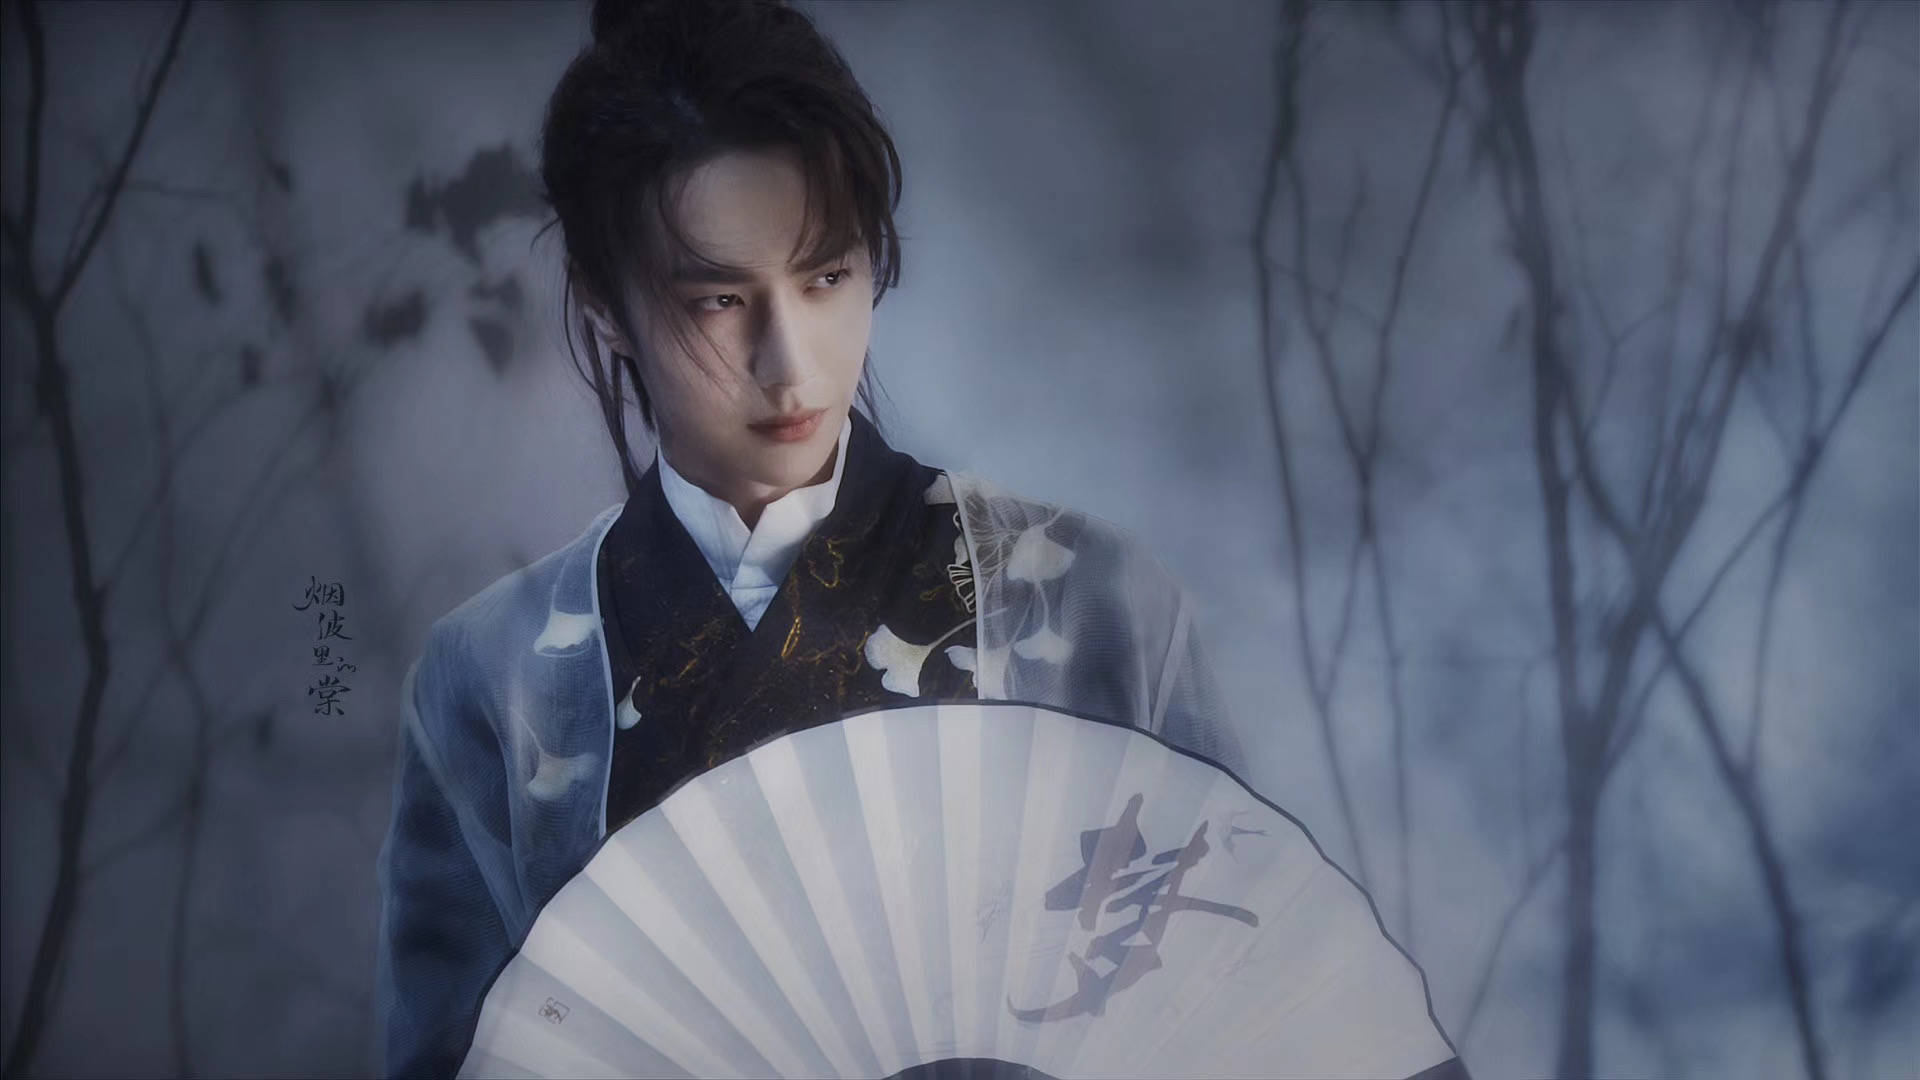 Wang Yibo Elegantly Stands Dominant in Traditional Fashion Wallpaper